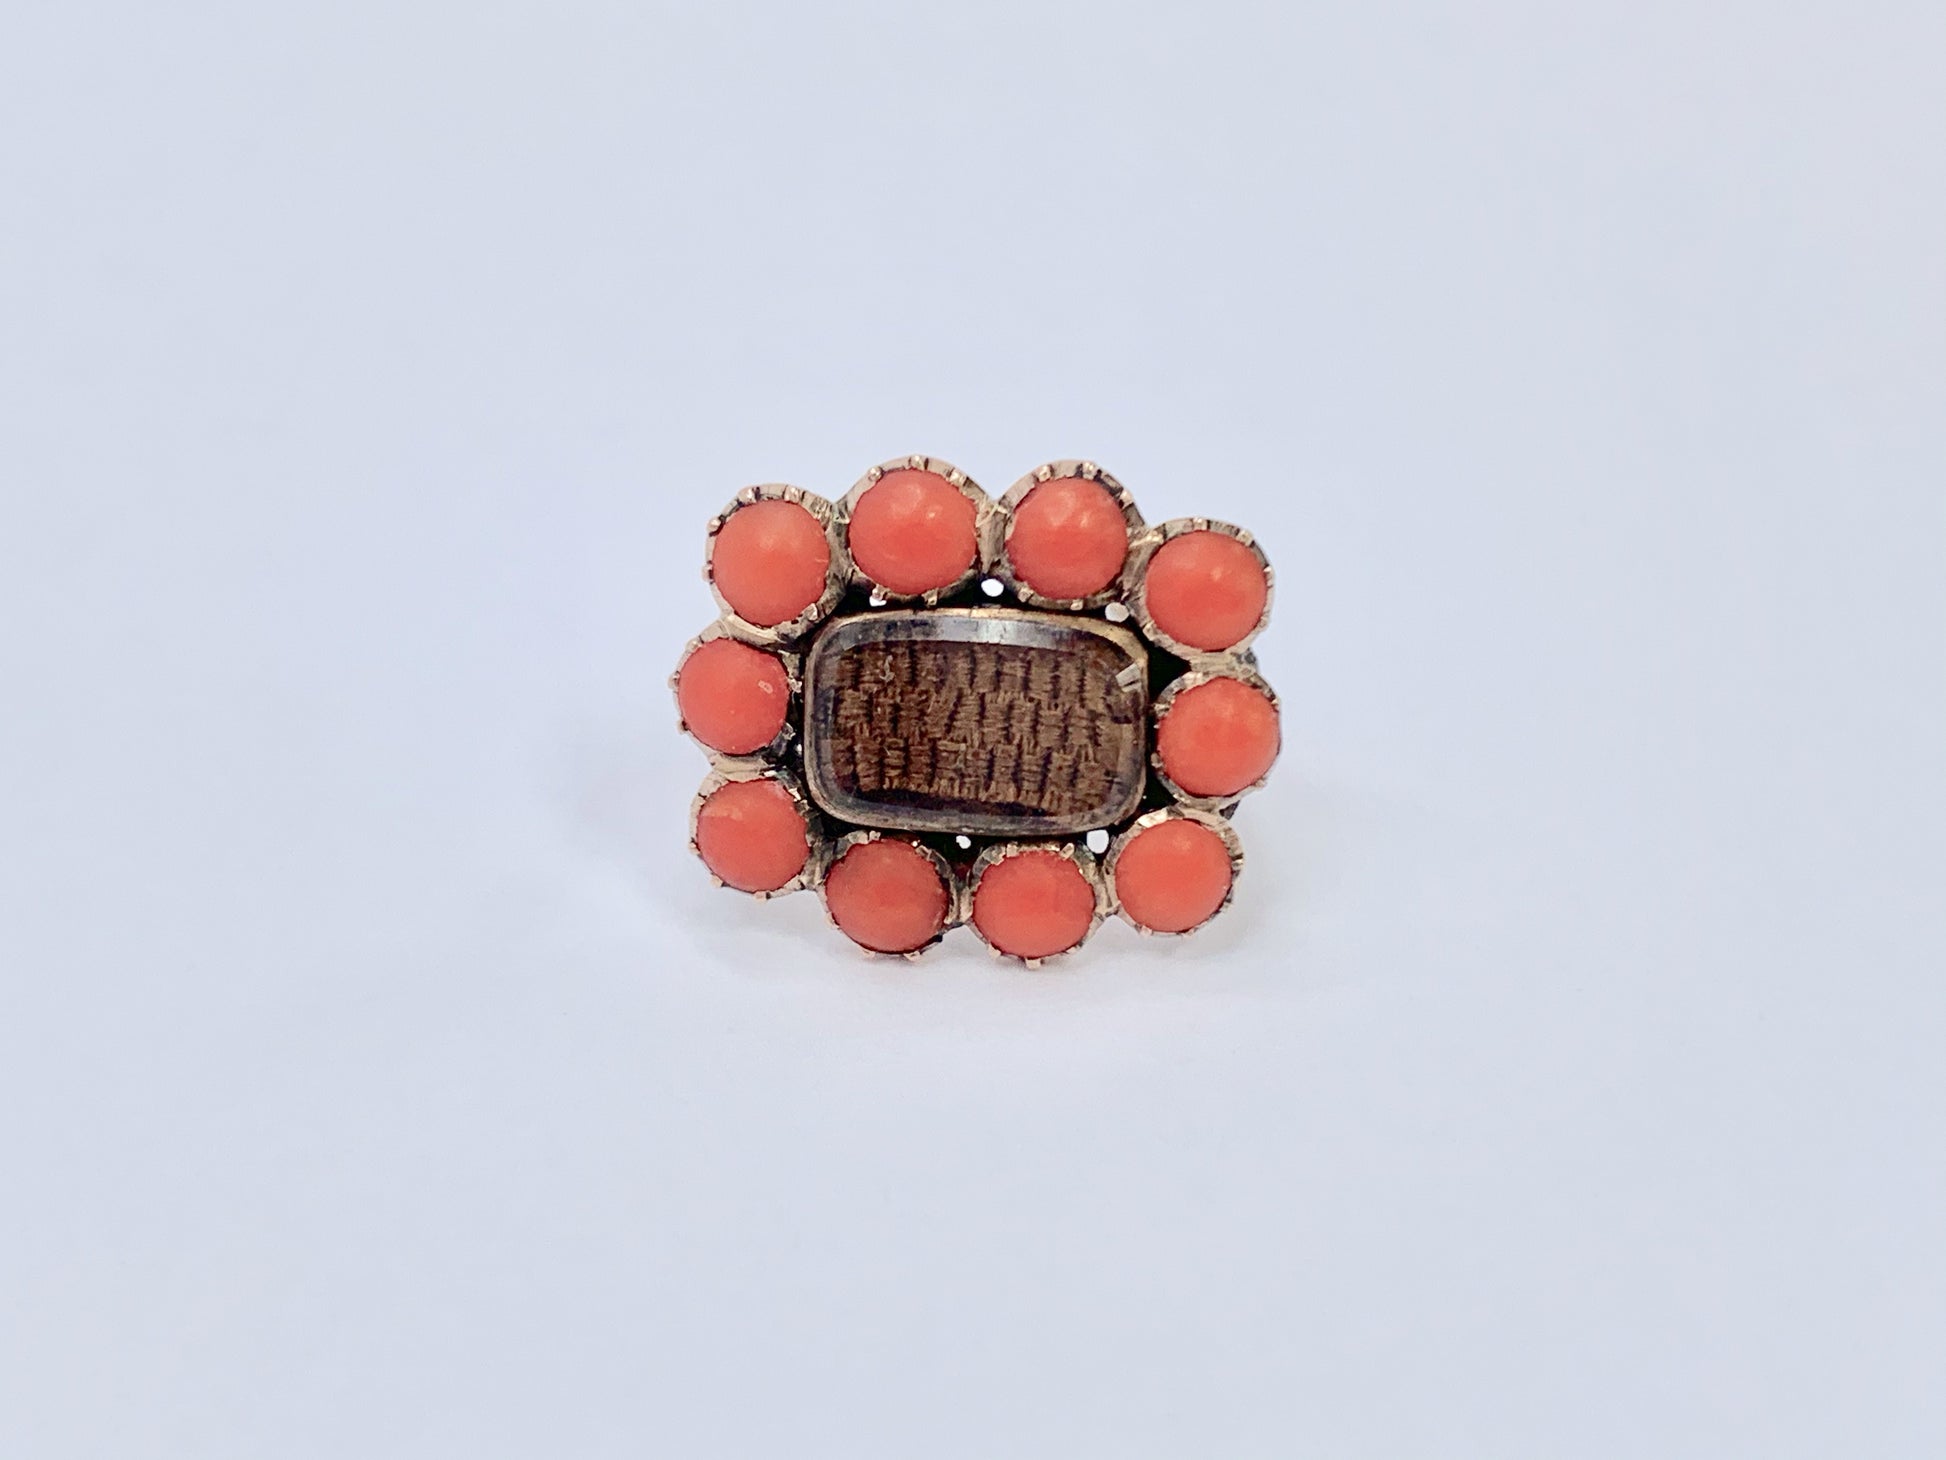 9ct-gold-georgian-mourning-brooch